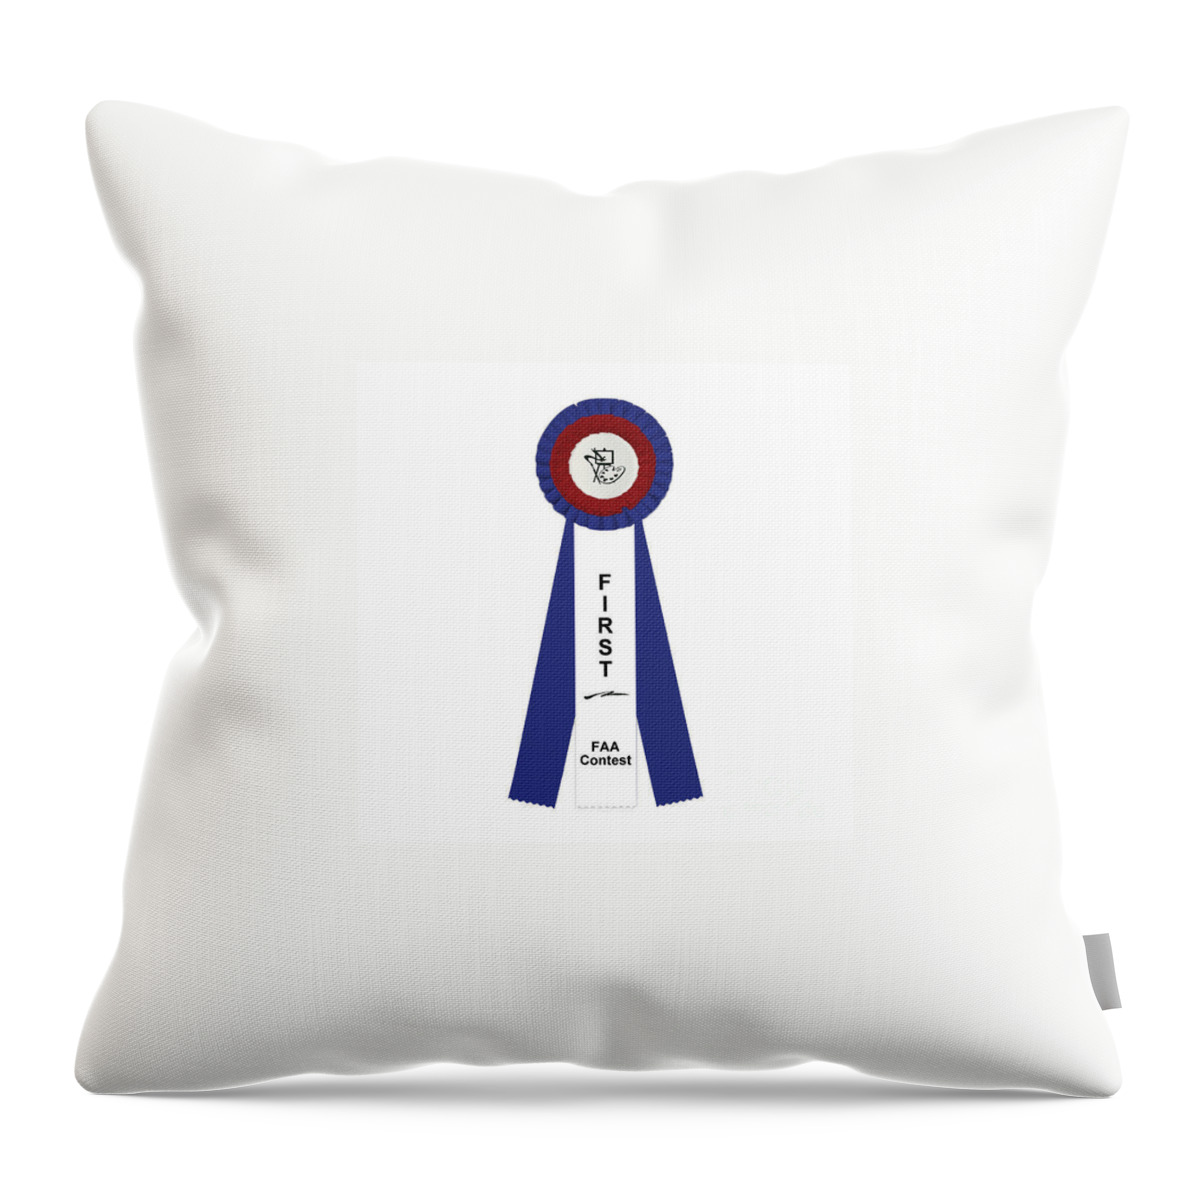 First Throw Pillow featuring the photograph First Place Award Ribbon by Renee Trenholm